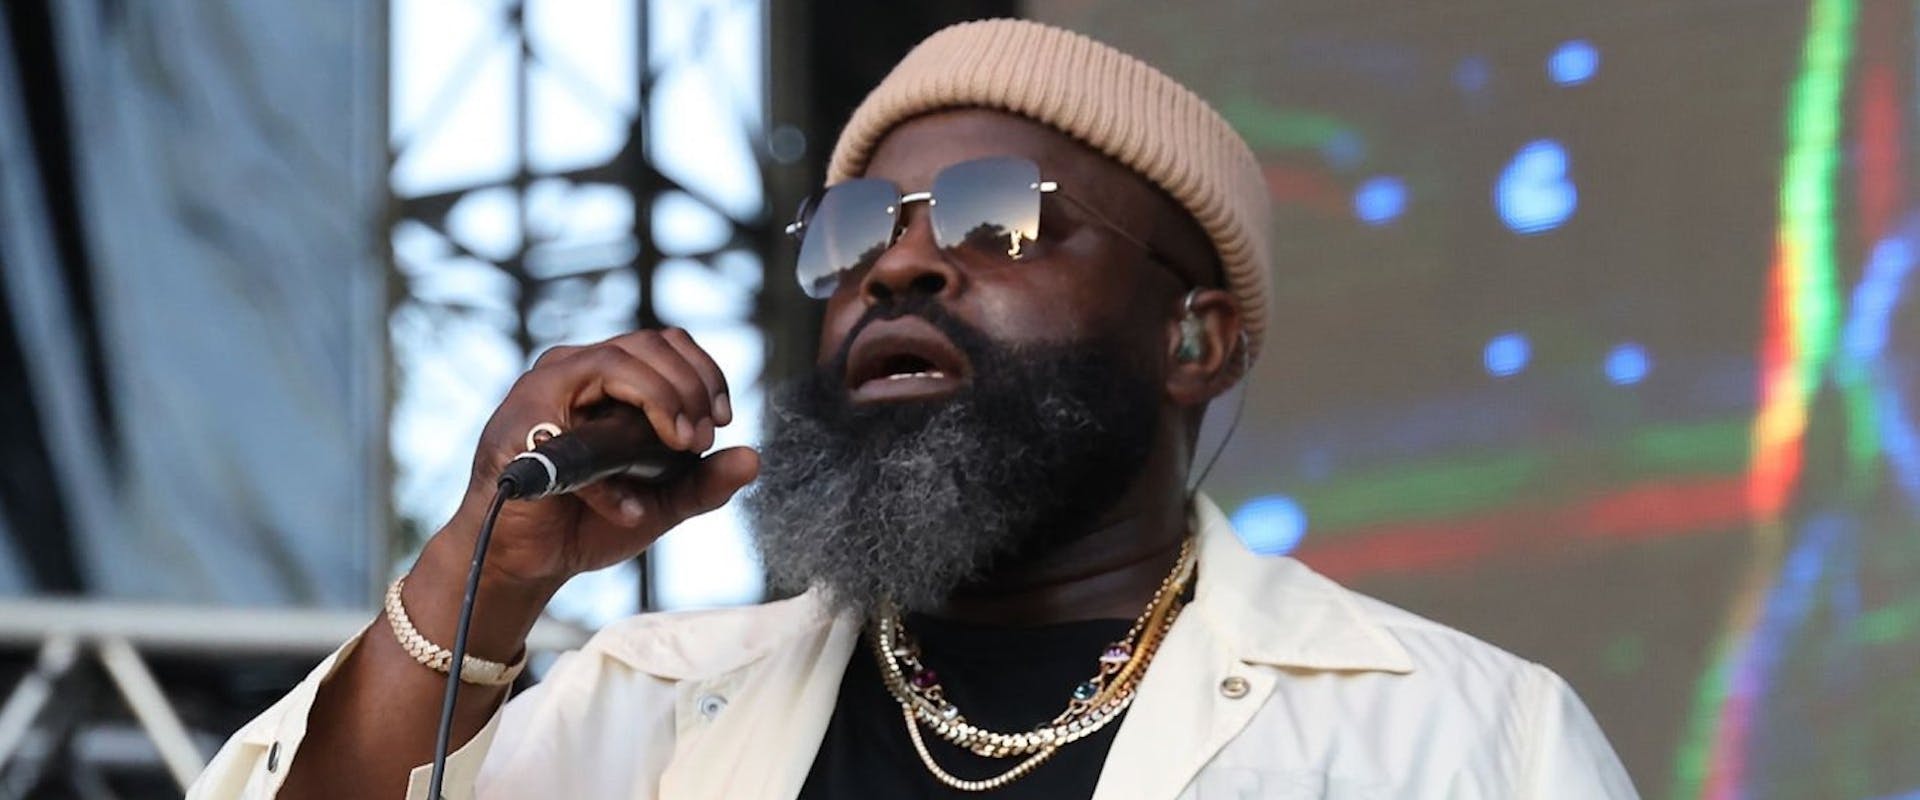 Tariq "Black Thought" Trotter performs during Roots Picnic 2022 at Mann Center For Performing Arts on June 04, 2022 in Philadelphia, Pennsylvania. (Photo by Taylor Hill/Getty Images for Live Nation Urban)